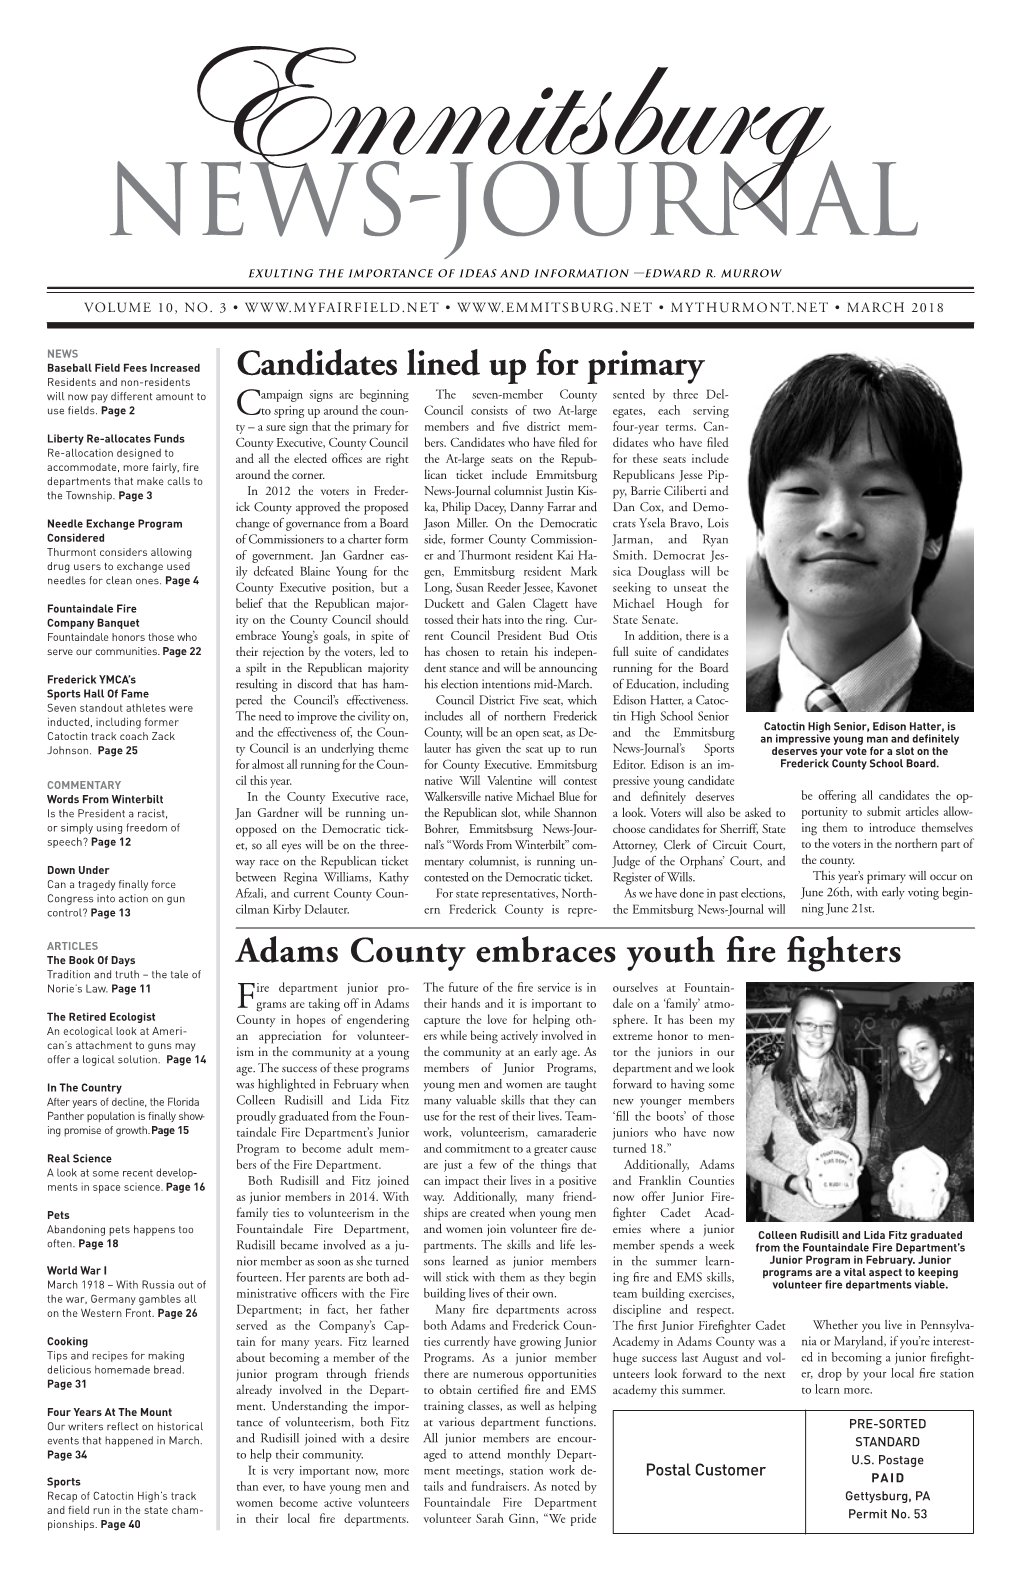 Candidates Lined up for Primary Adams County Embraces Youth Fire